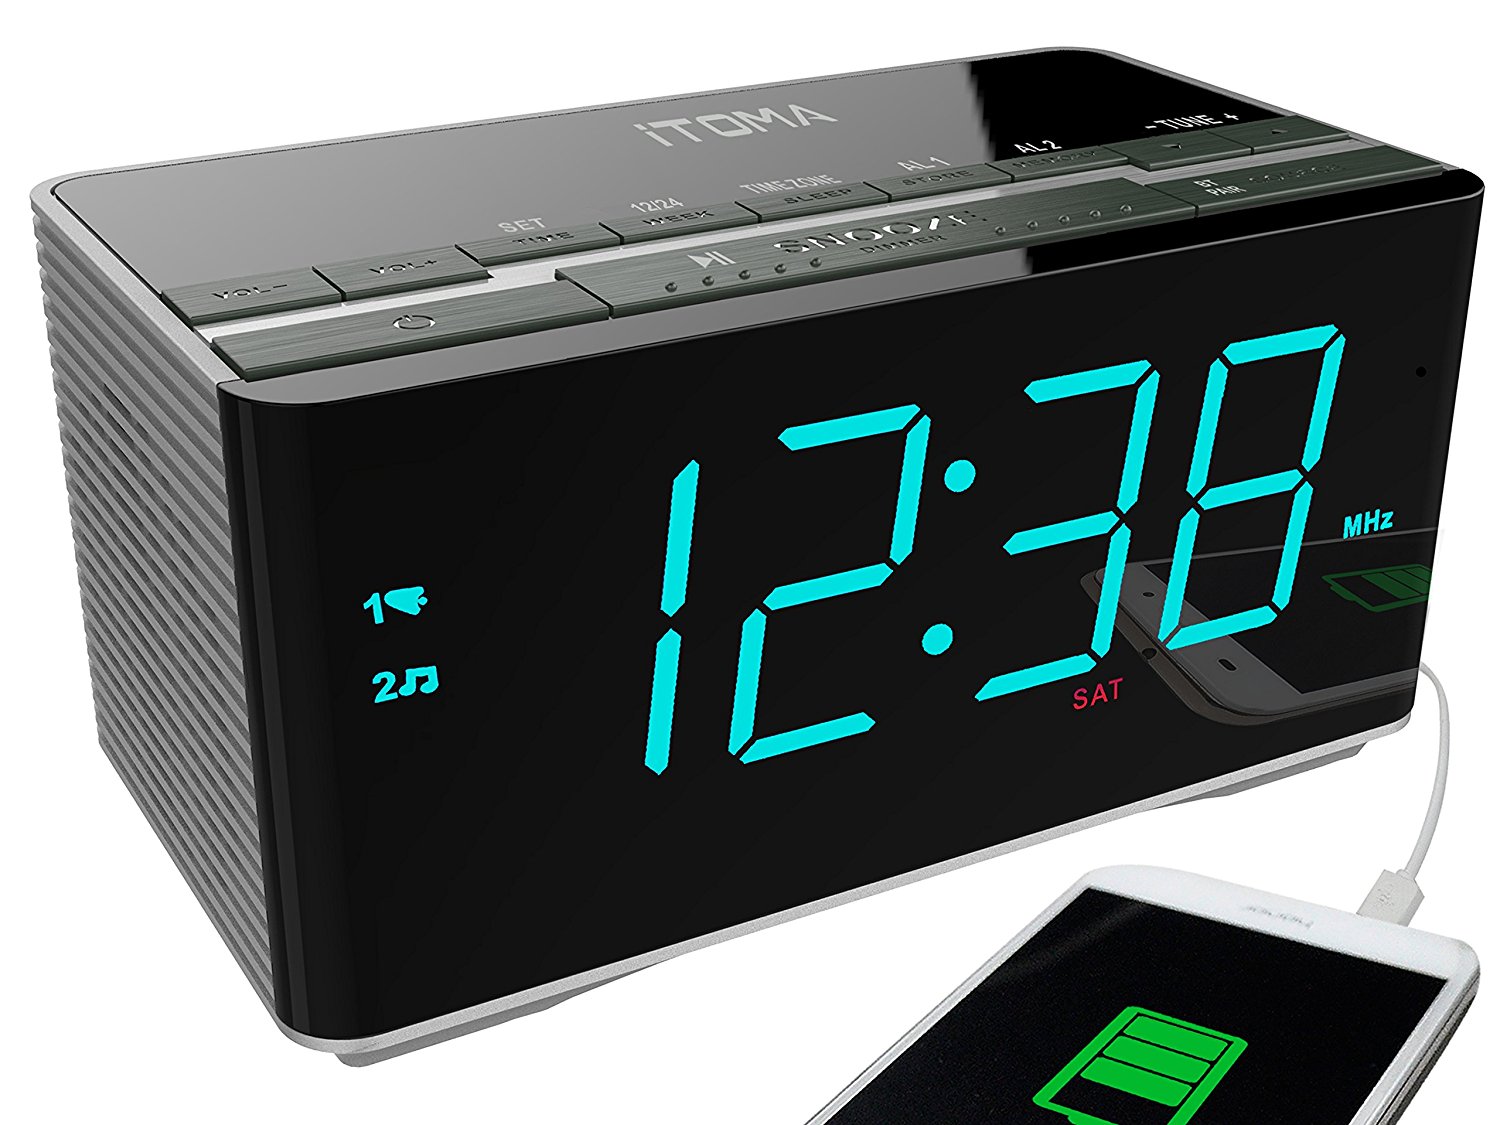 iTOMA Alarm Clock Radio with Wireless Bluetooth Stereo Speakers,Digital FM Radio,Auto Time Setting,Dual Alarm with Snooze,Auto Dimmer,Cell Phone USB Charging (CKS3501BT)